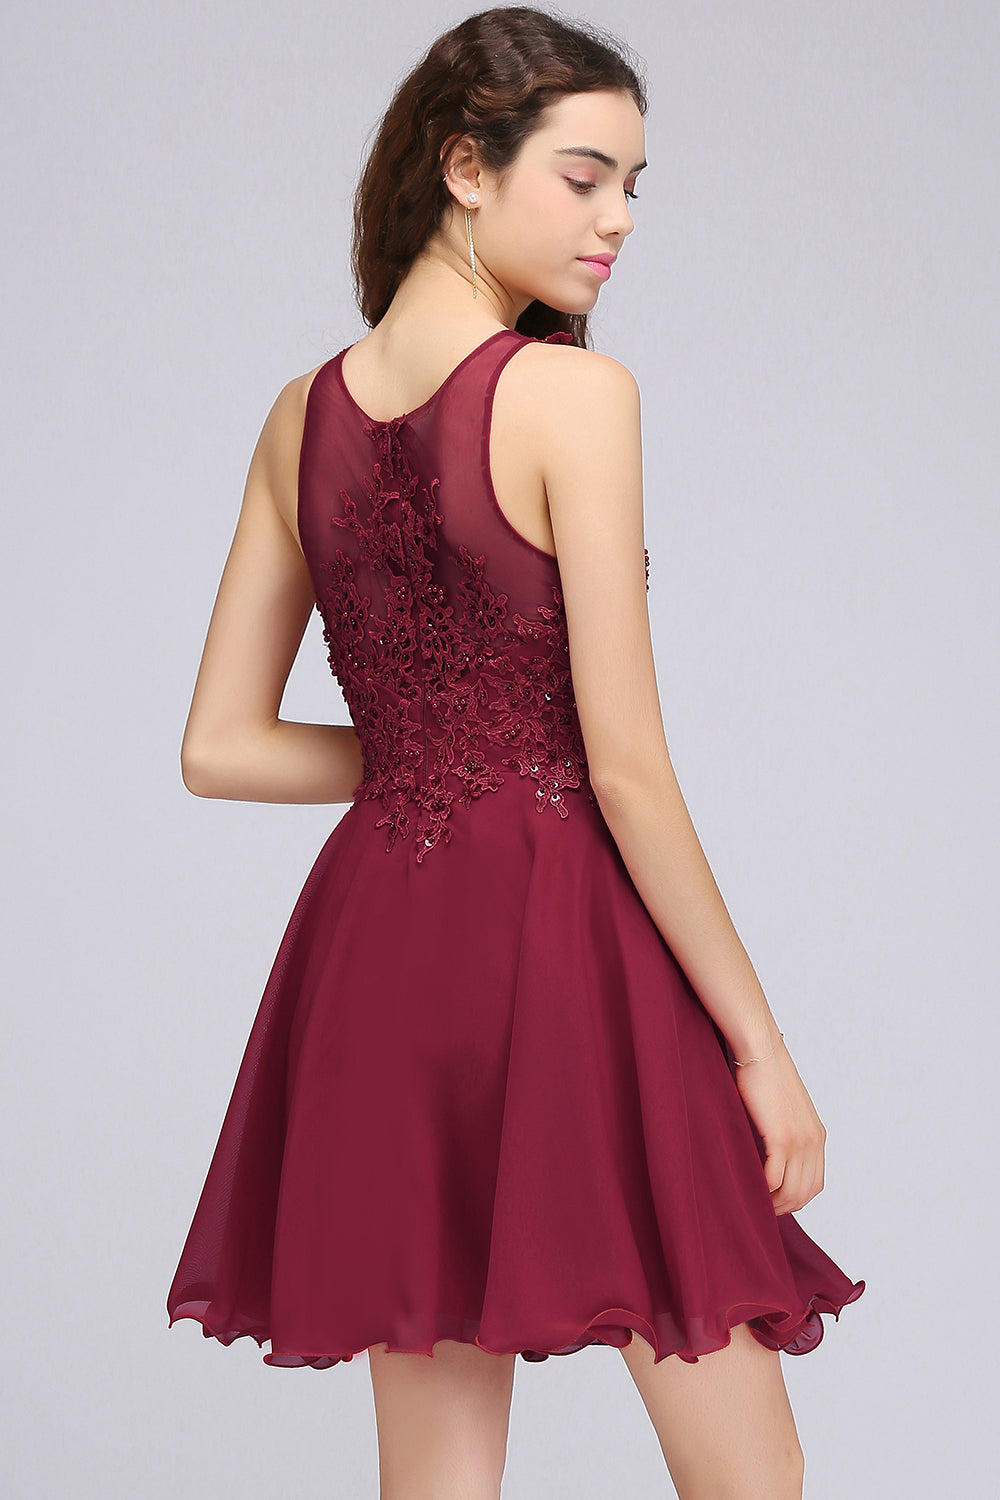 Lovely Lace Short Burgundy Bridesmaid Dress with Appliques-27dress